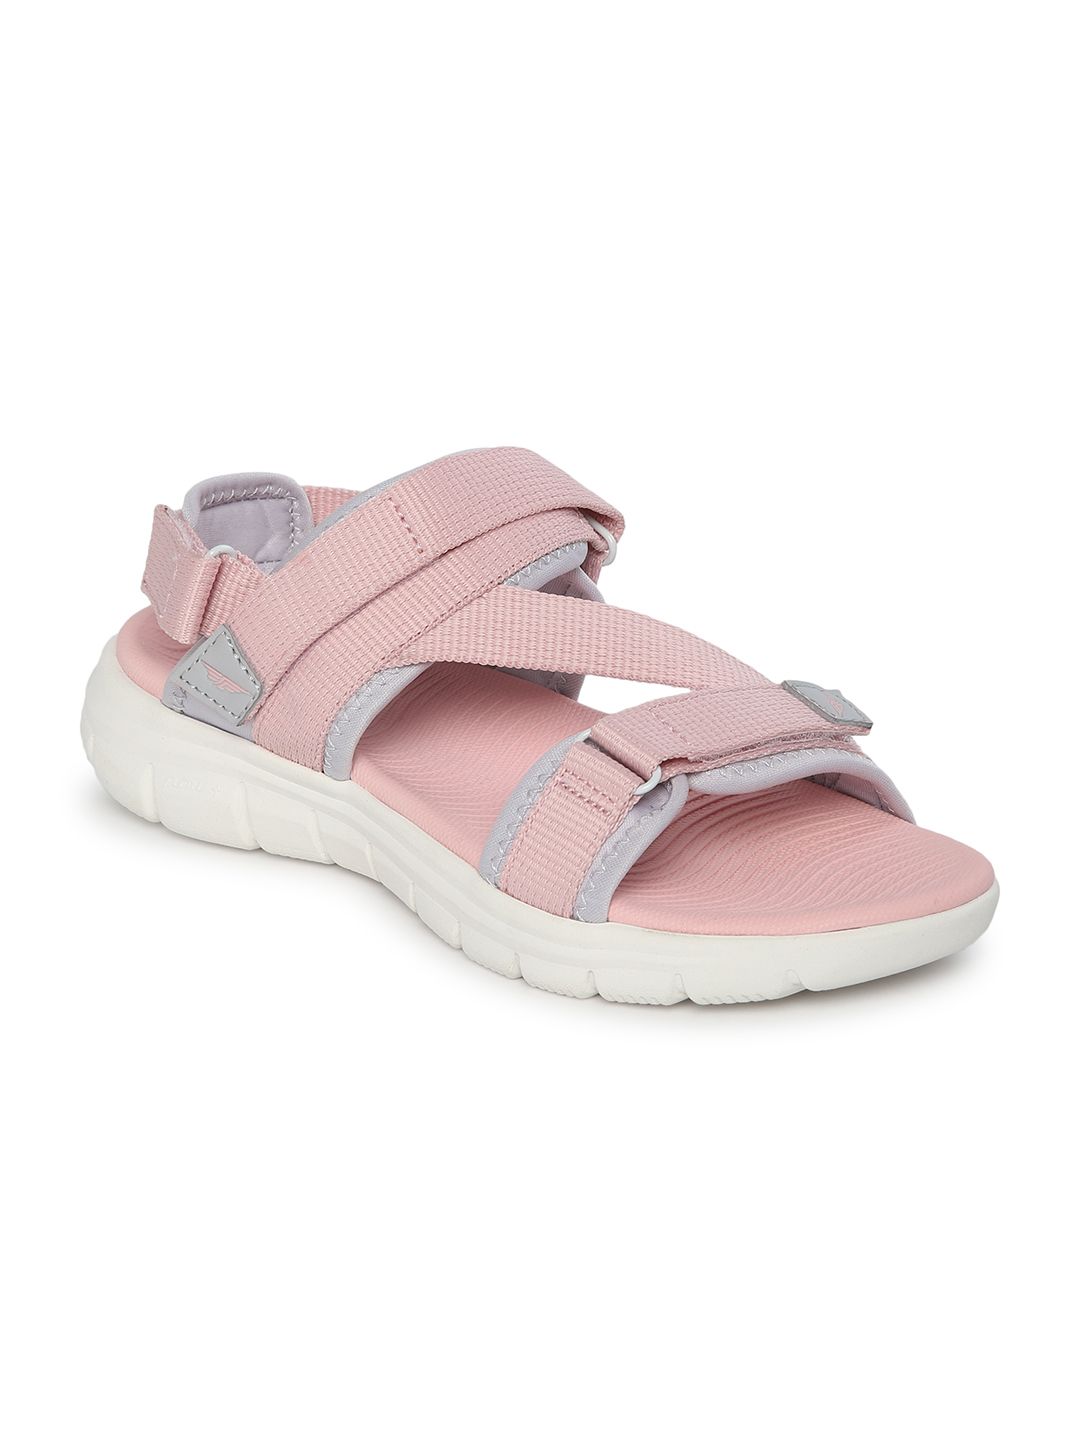 Red Tape Women Pink Sports Sandals Price in India